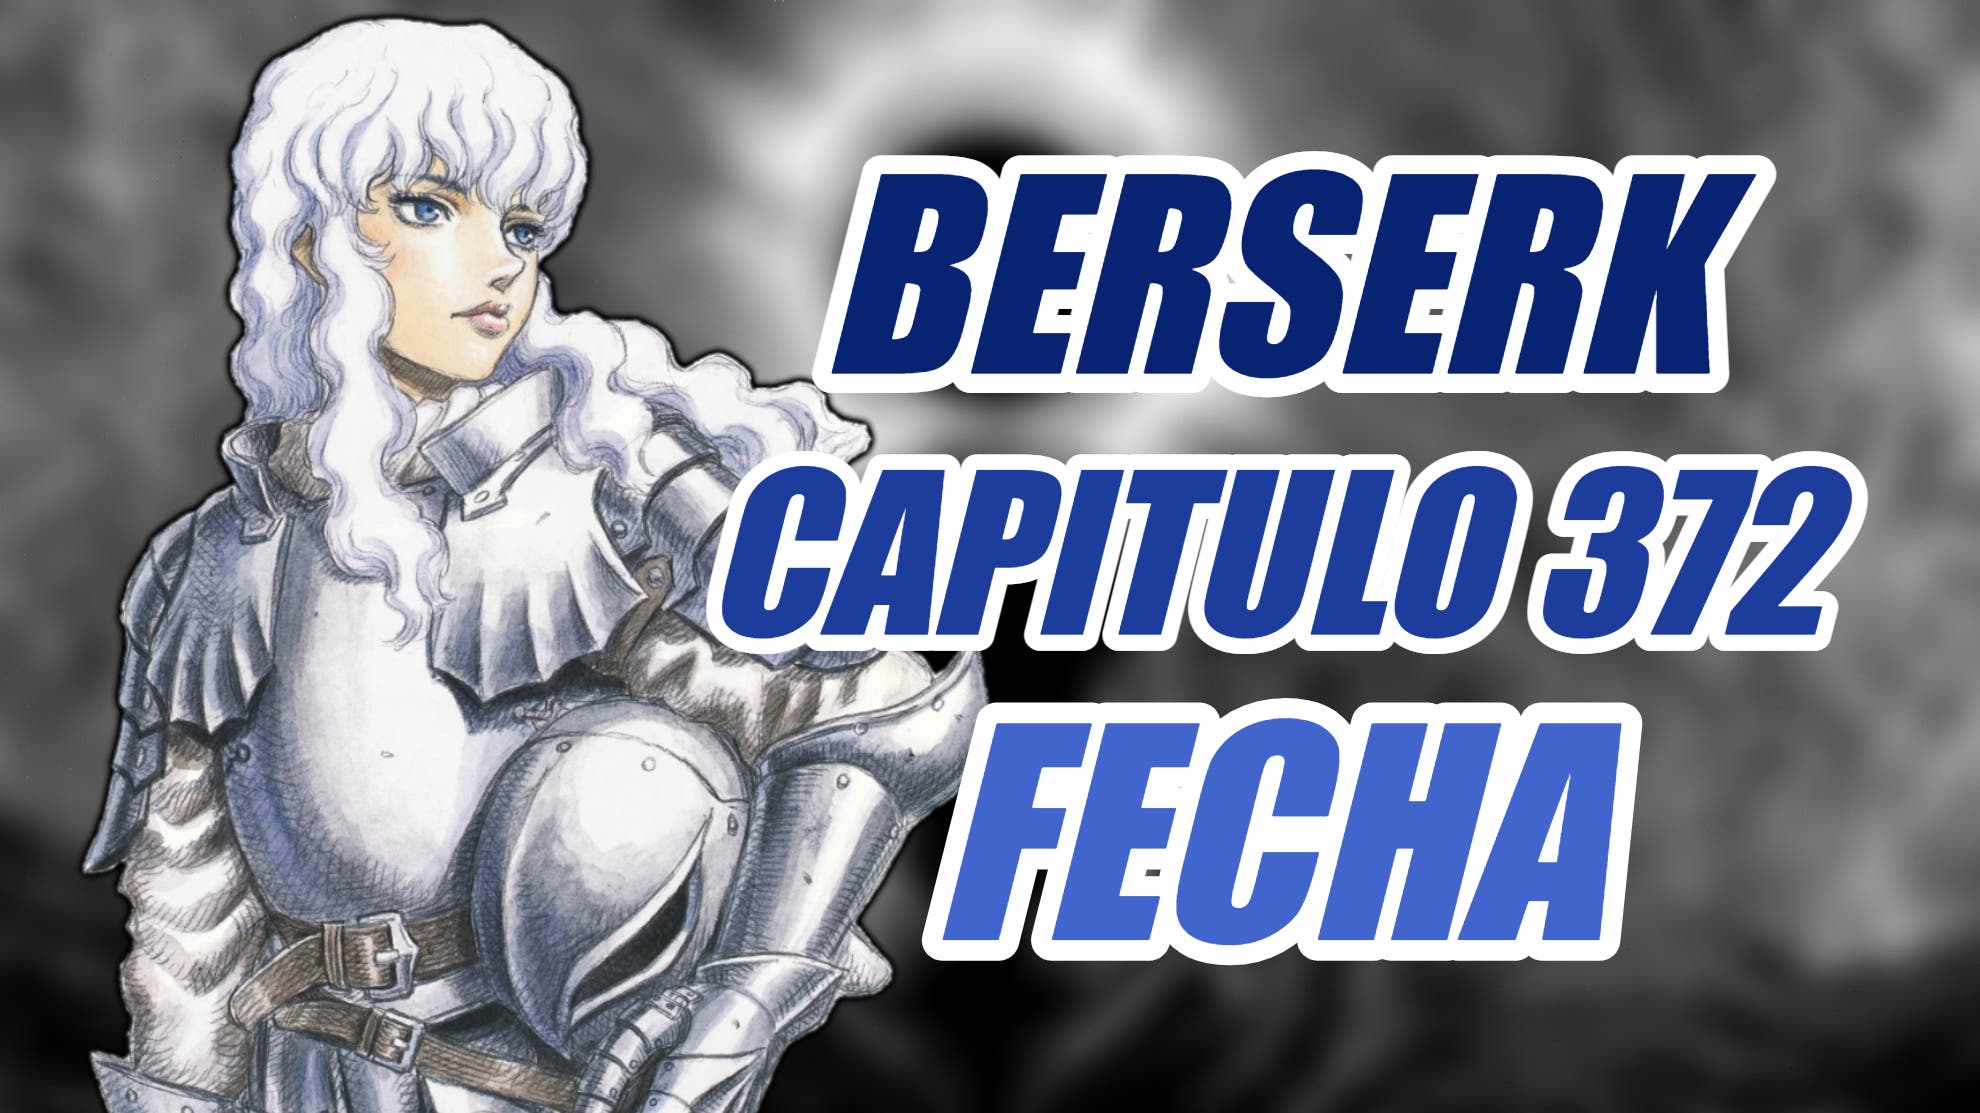 Berserk will return this month!  : announced the release date of manga chapter 372